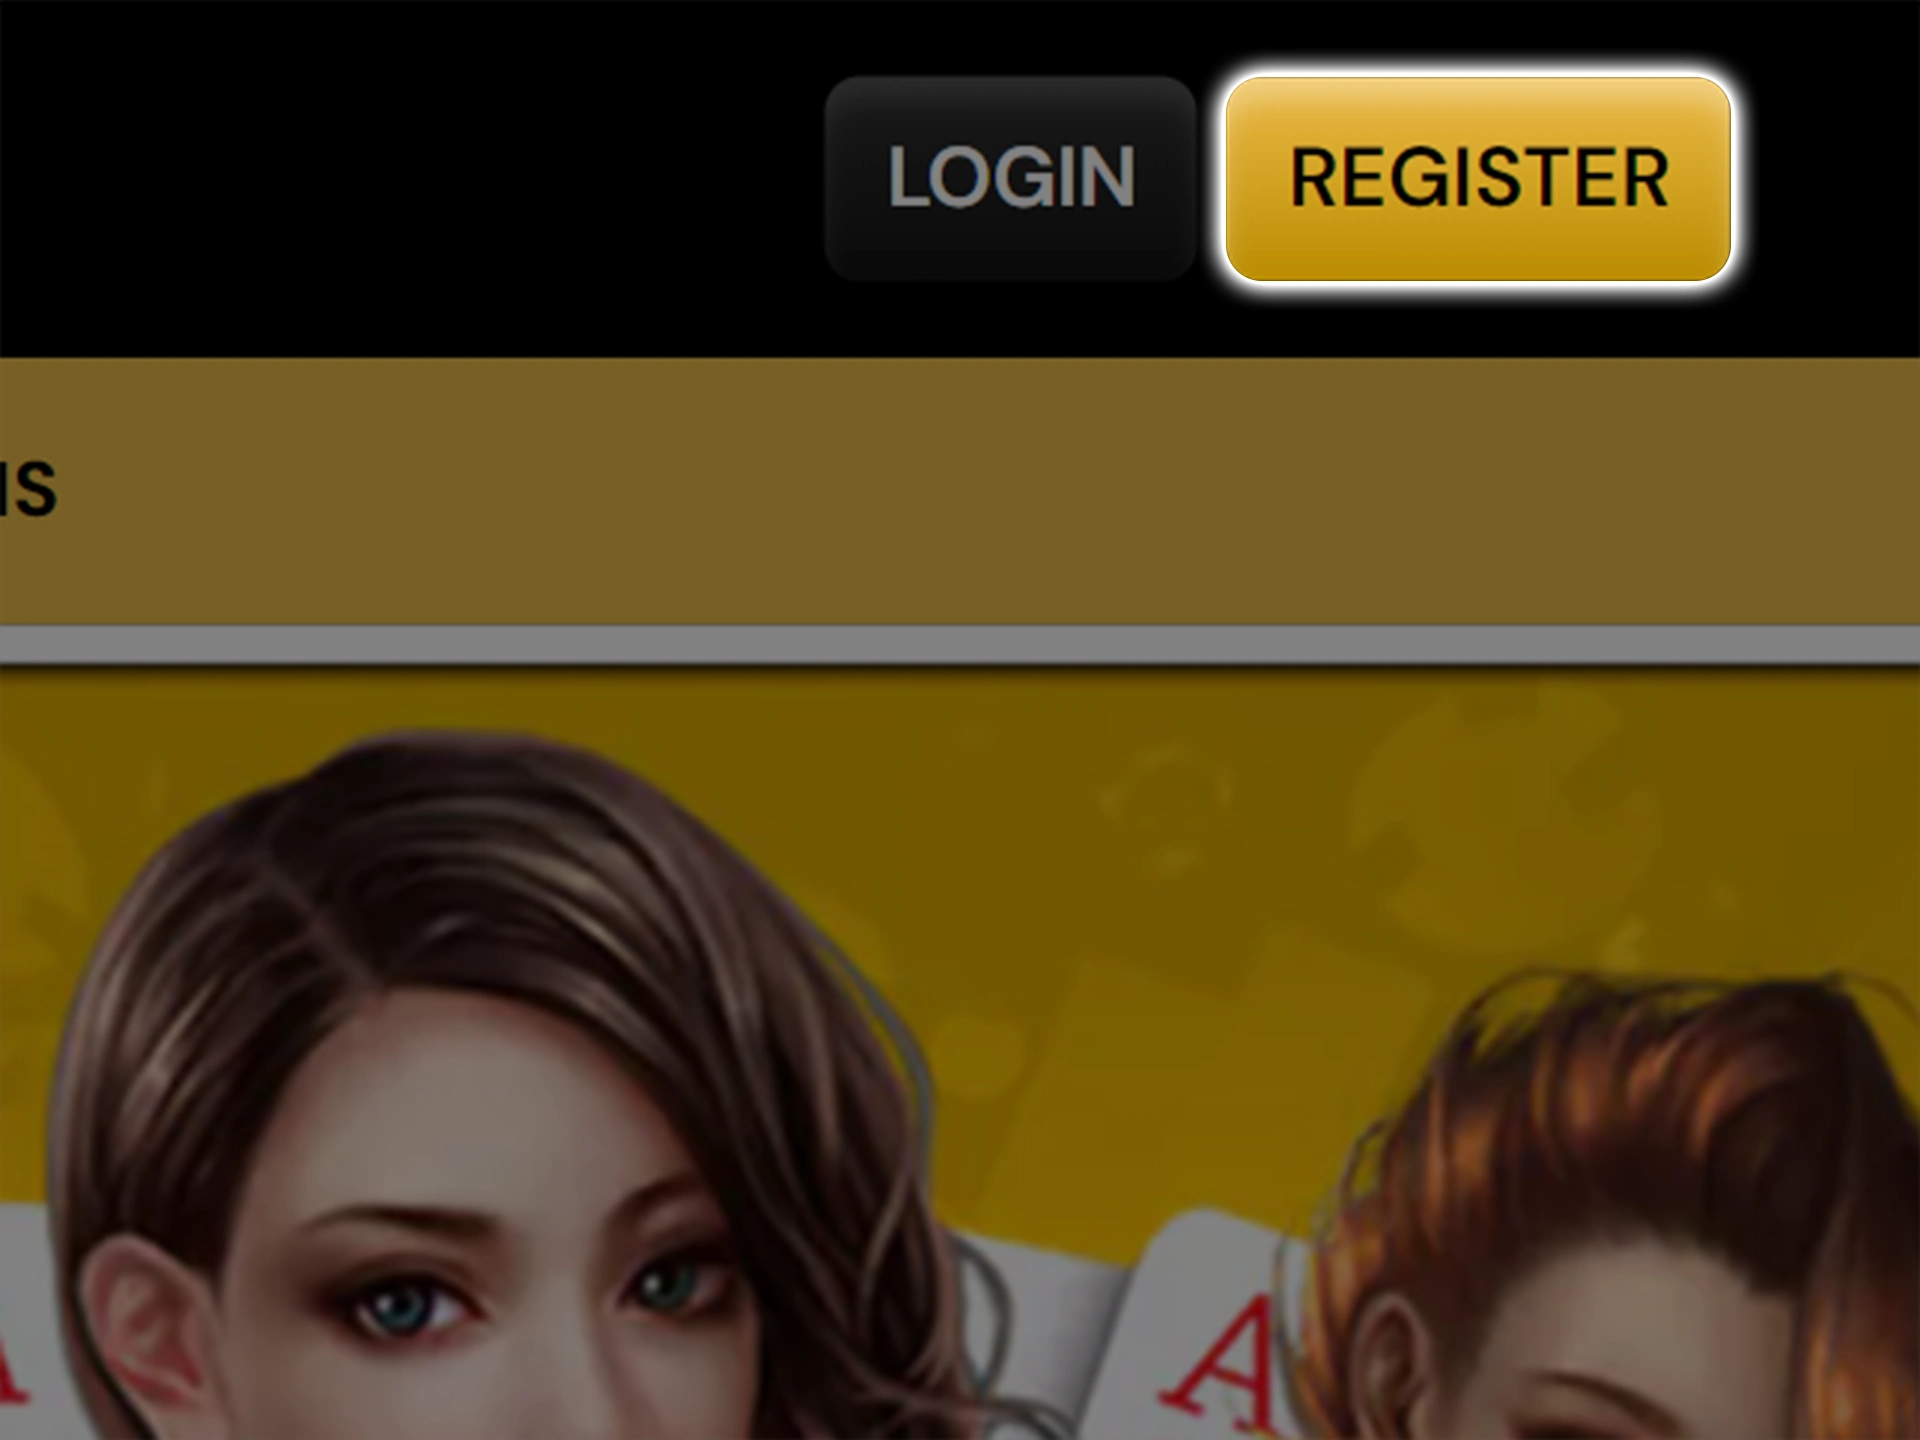 Use the sign up button to open the Satbet registration form.